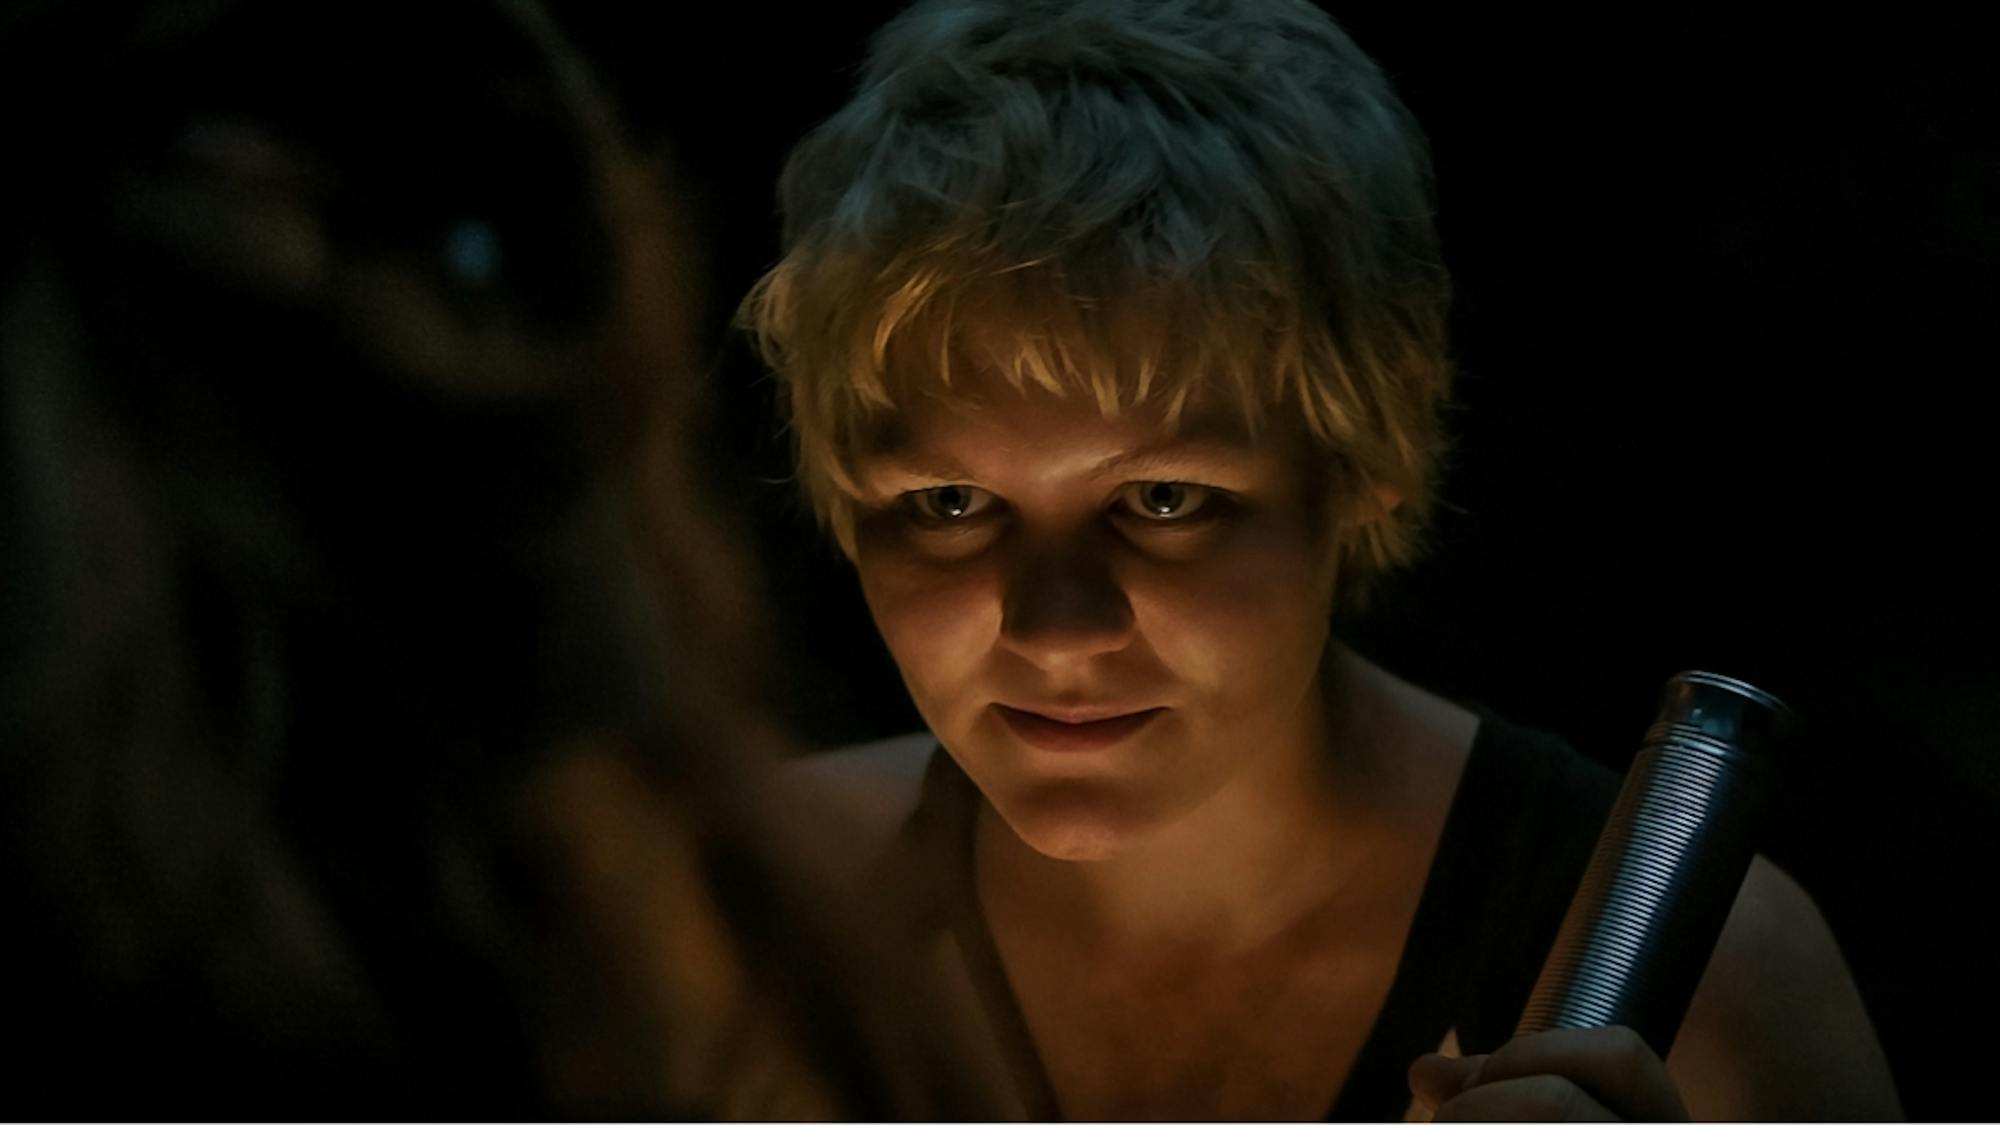 Alice (Ryan Simpkins) in a dark ominous shot. She holds some kind of silver weapon.